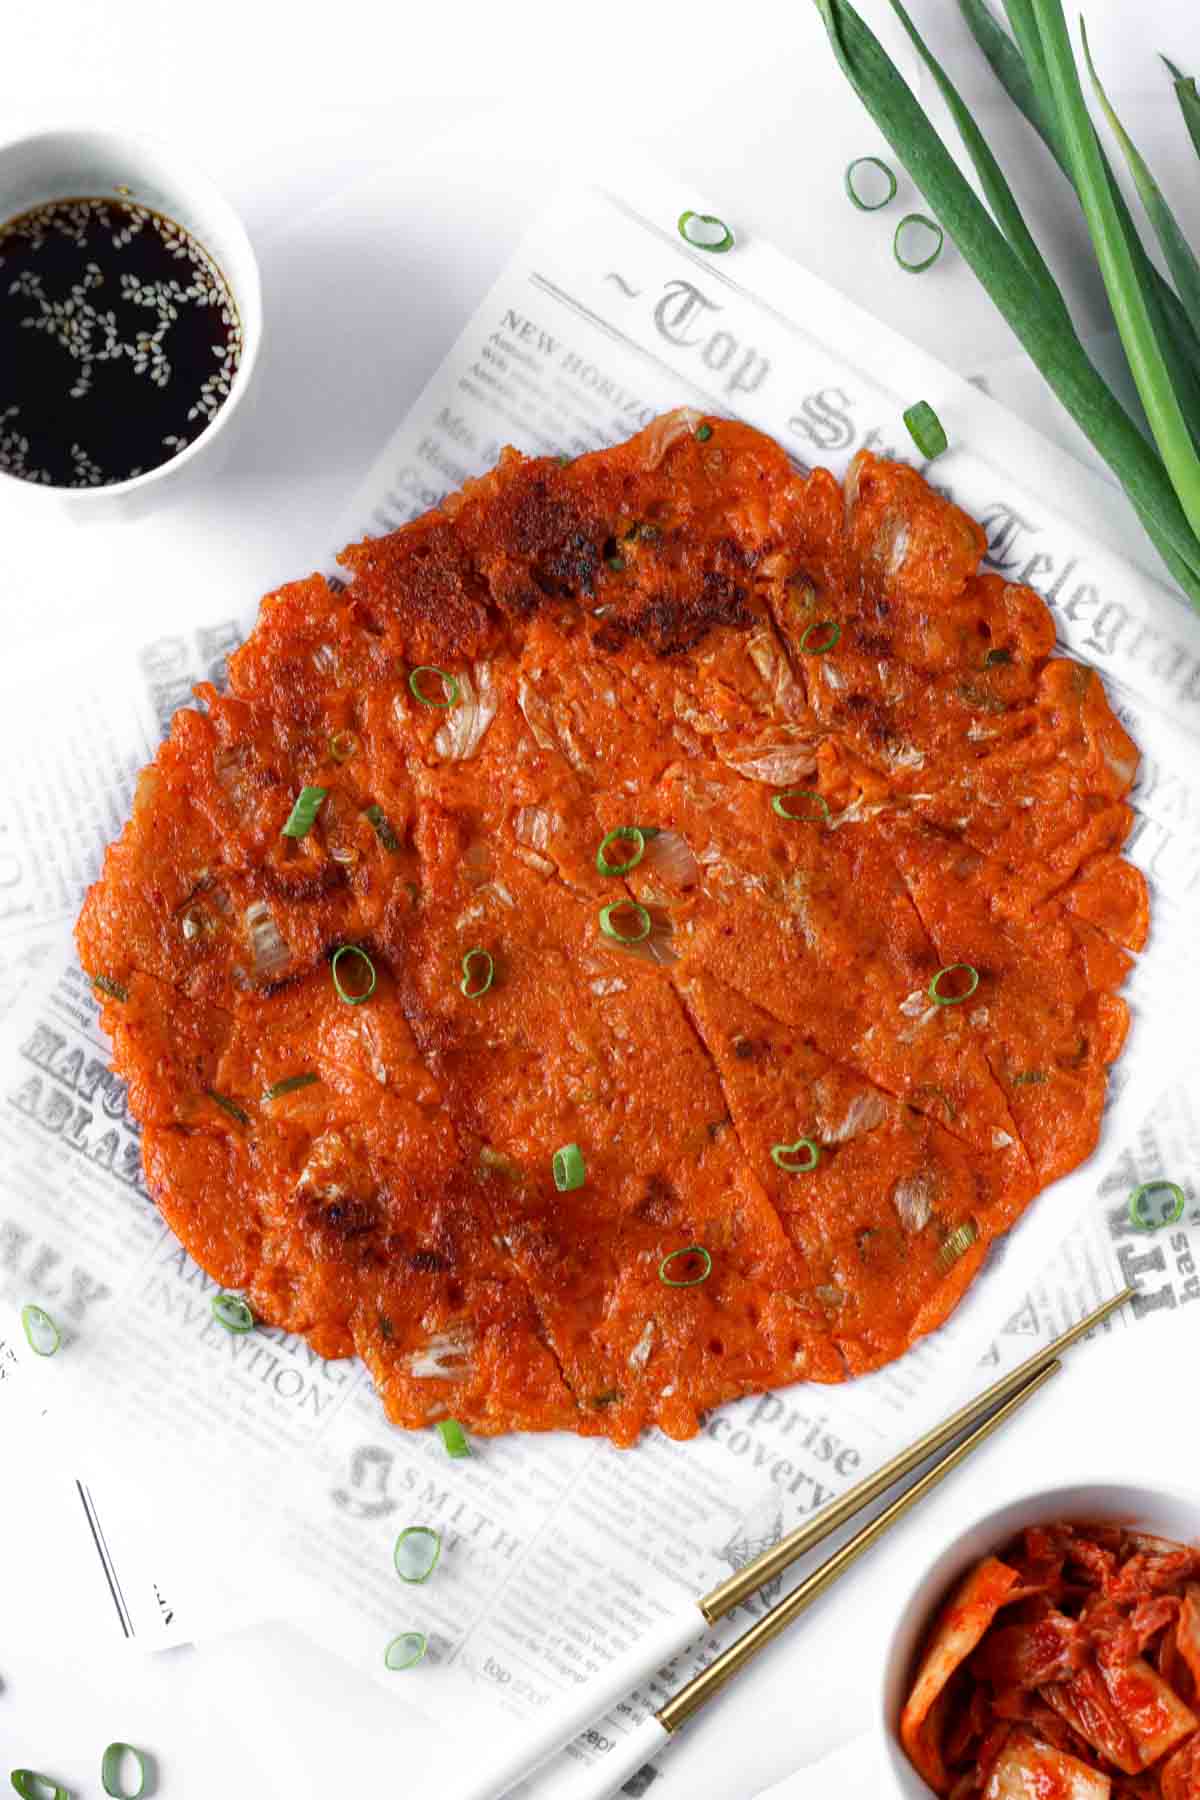 Kimchi Pancakes: Tips for a Super Crispy, Non-Chewy Kimchijeon